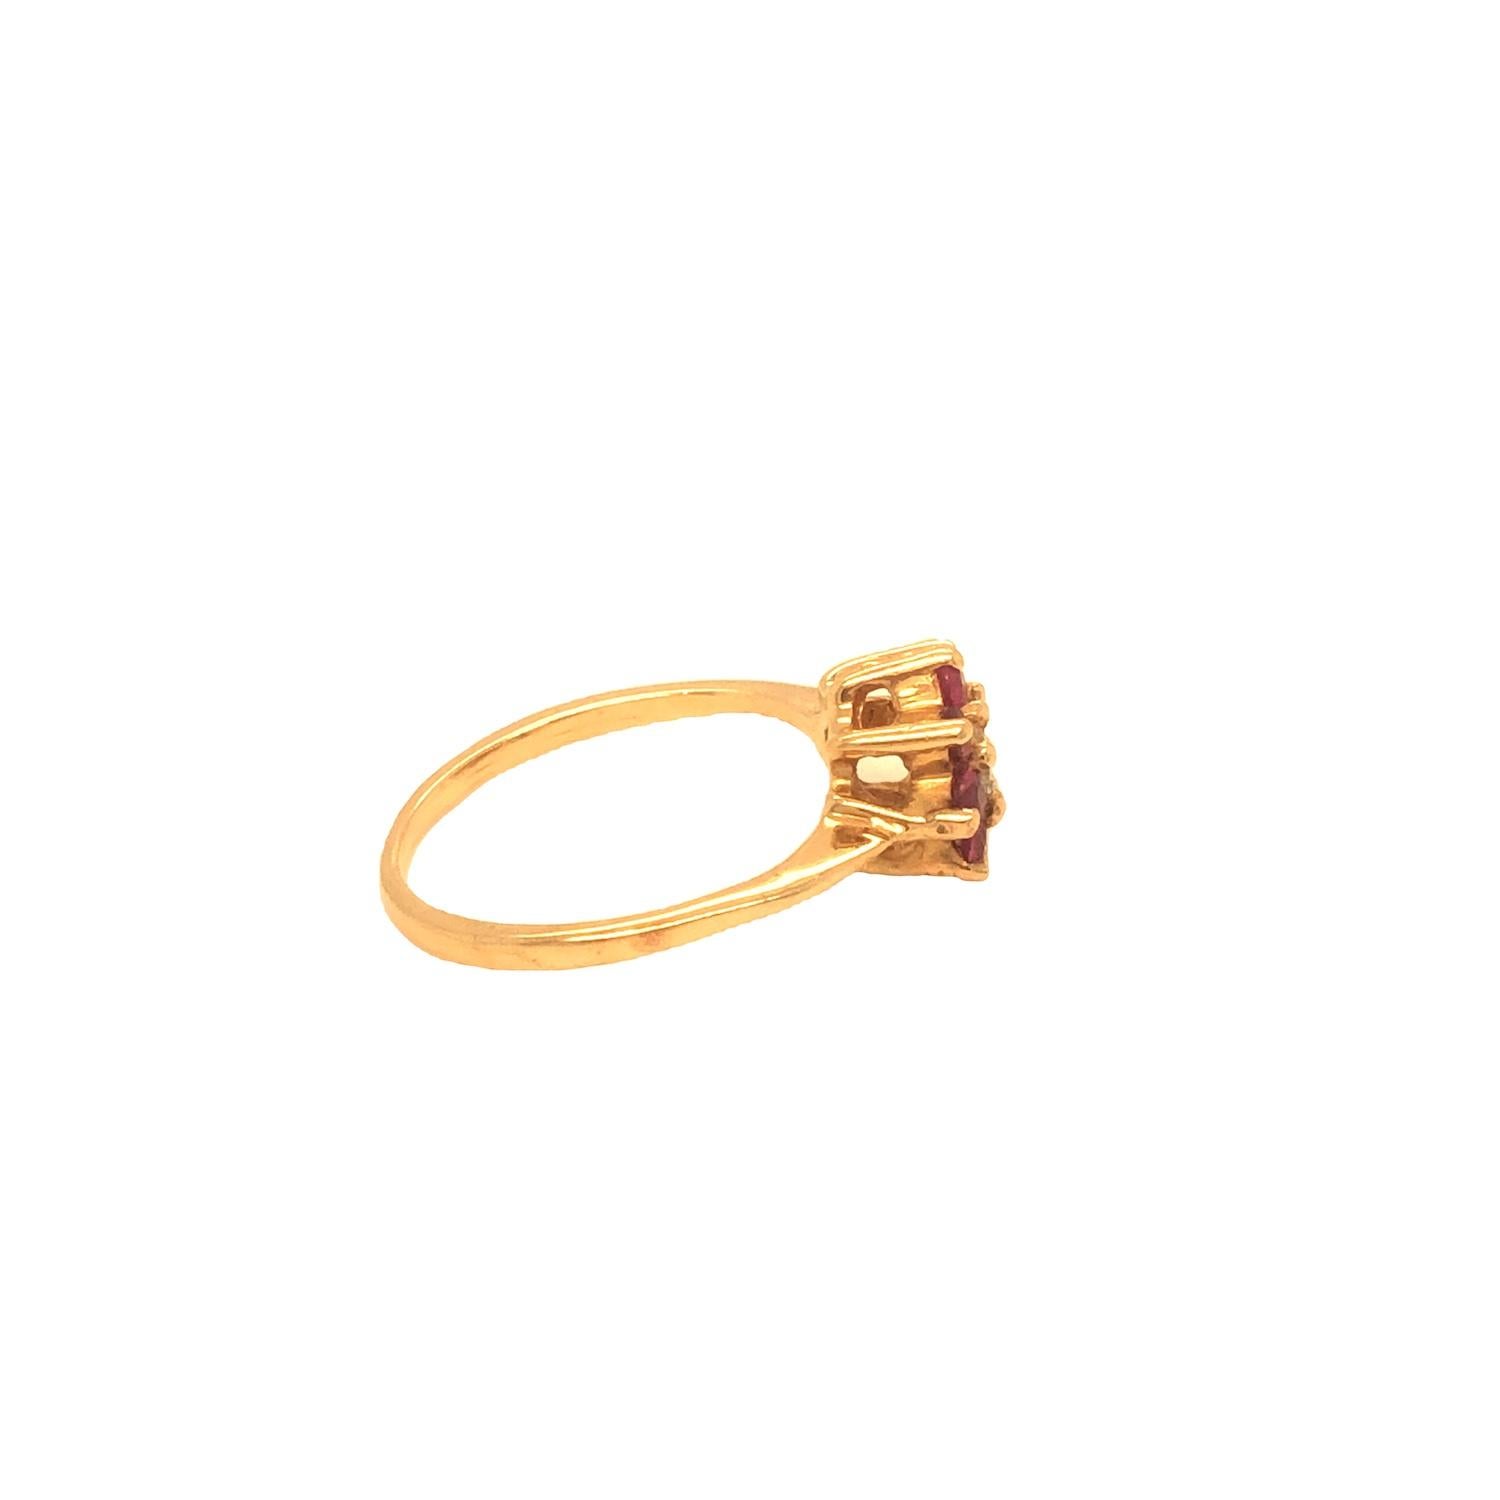 Vintage dainty diamond ring features approximately 0.25 carat center stone. The diamond is encircled with eight rubies weighing approximately .24 carat. The ring is crafted in 14K yellow gold. Currently size 5 (resizable).